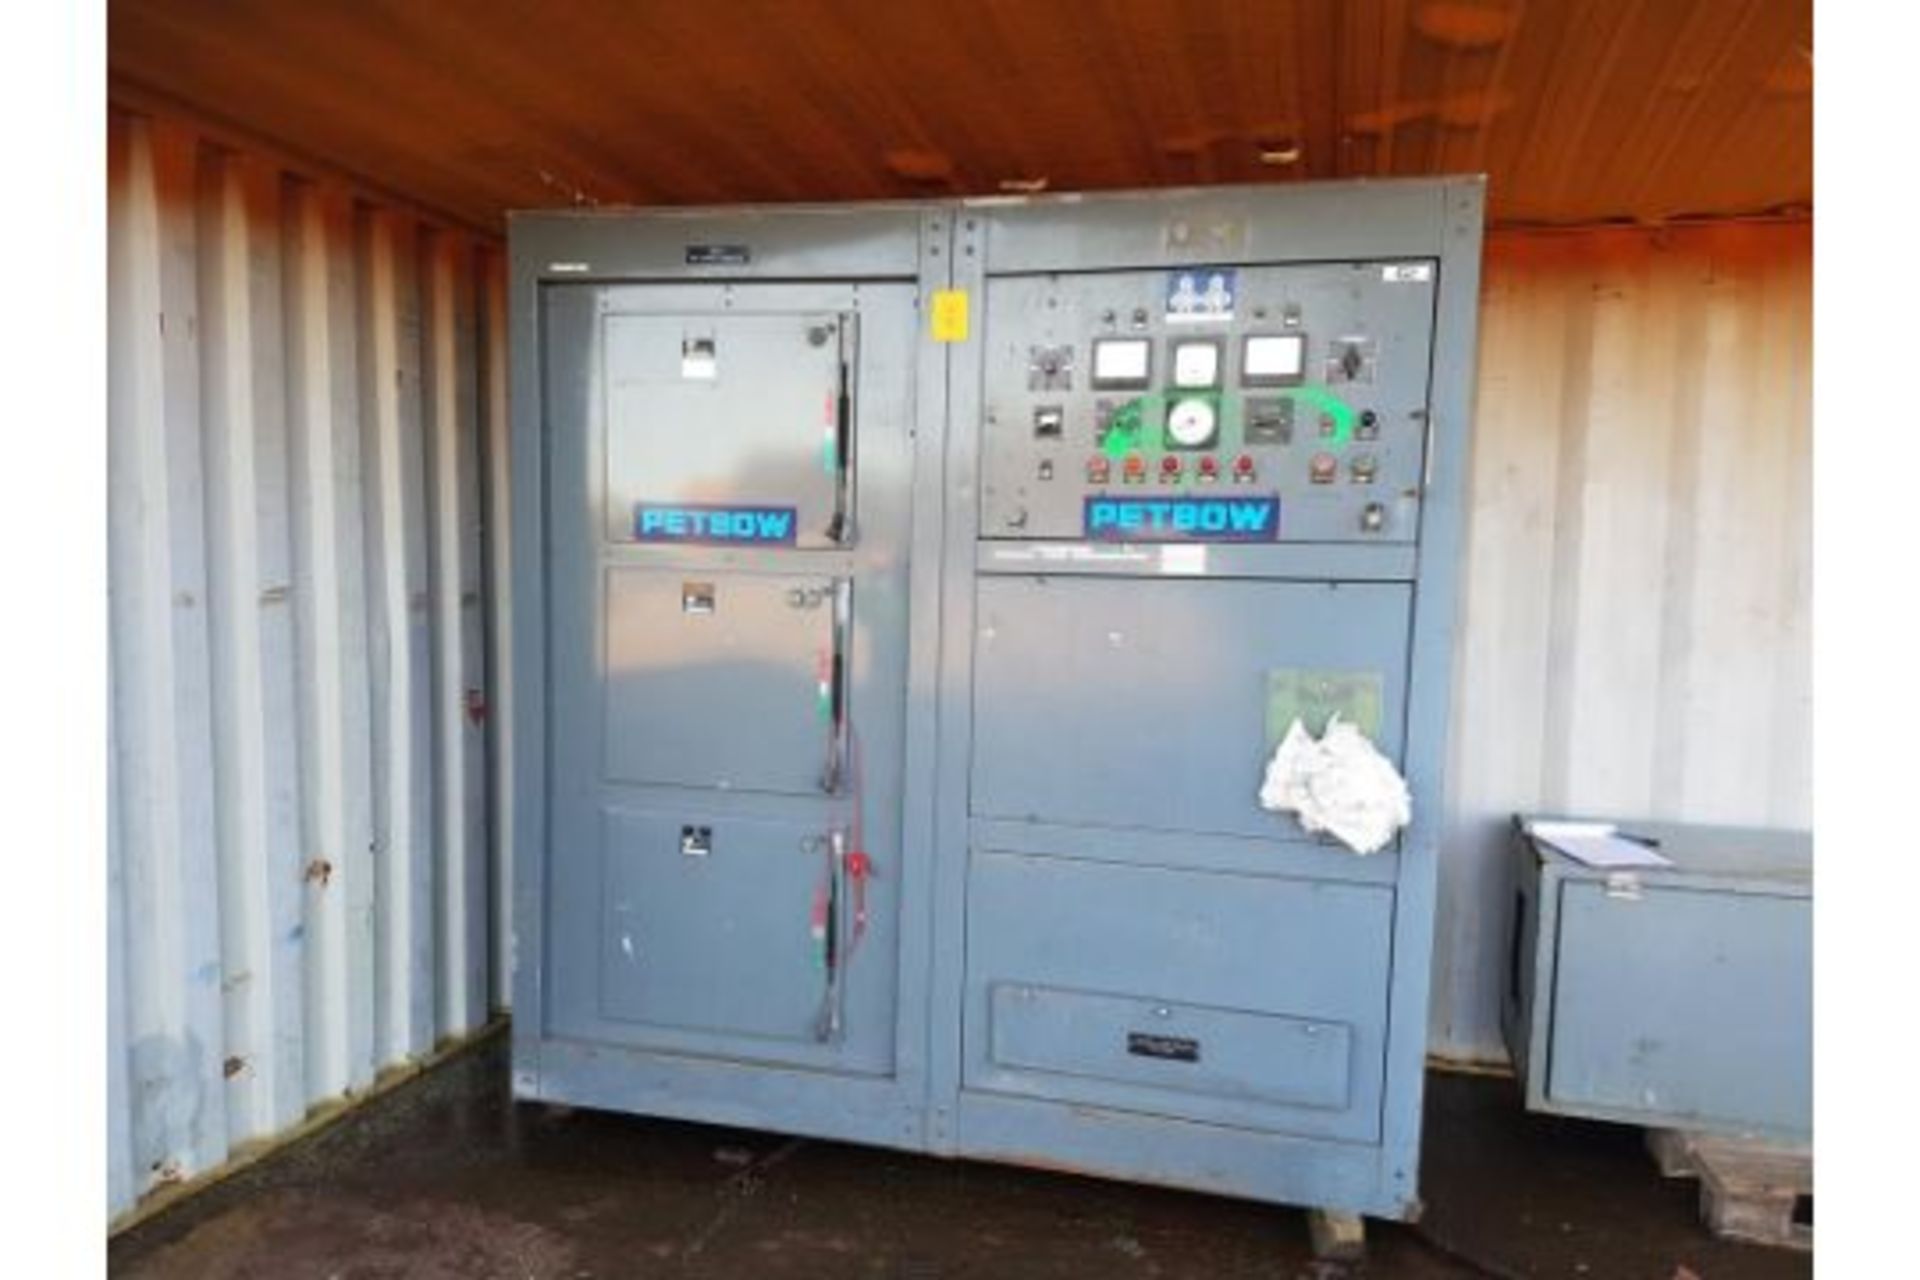 Large Petbow Generator Control Panel, Ex Standby